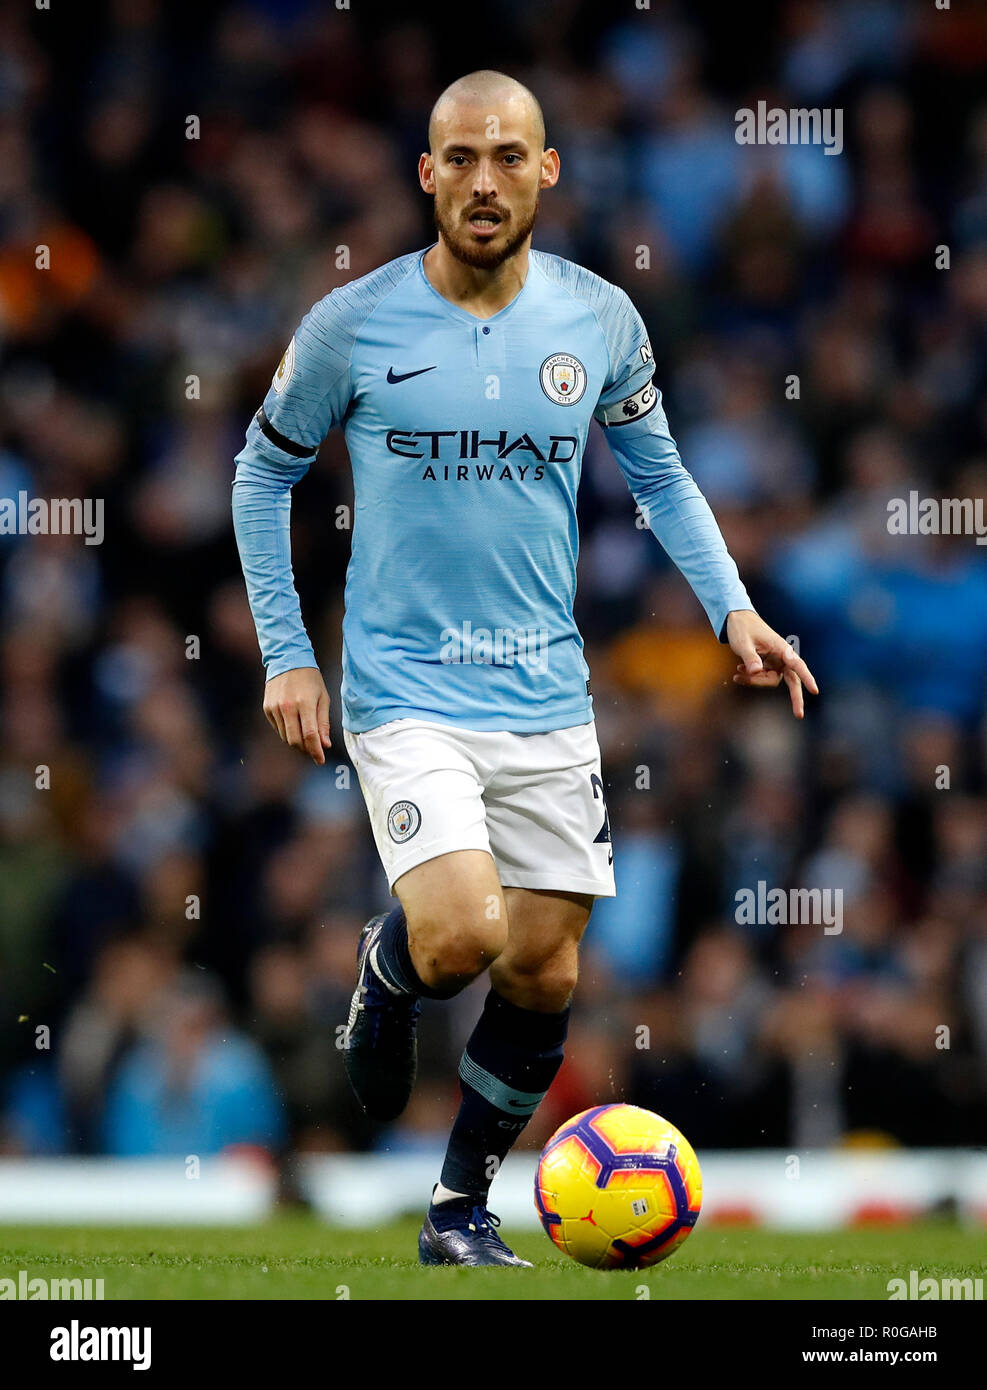 Manchester City's David Silva during the Premier League match at the Etihad  Stadium, Manchester. PRESS ASSOCIATION Photo. Picture date: Sunday November  4, 2018. See PA story SOCCER Man City. Photo credit should